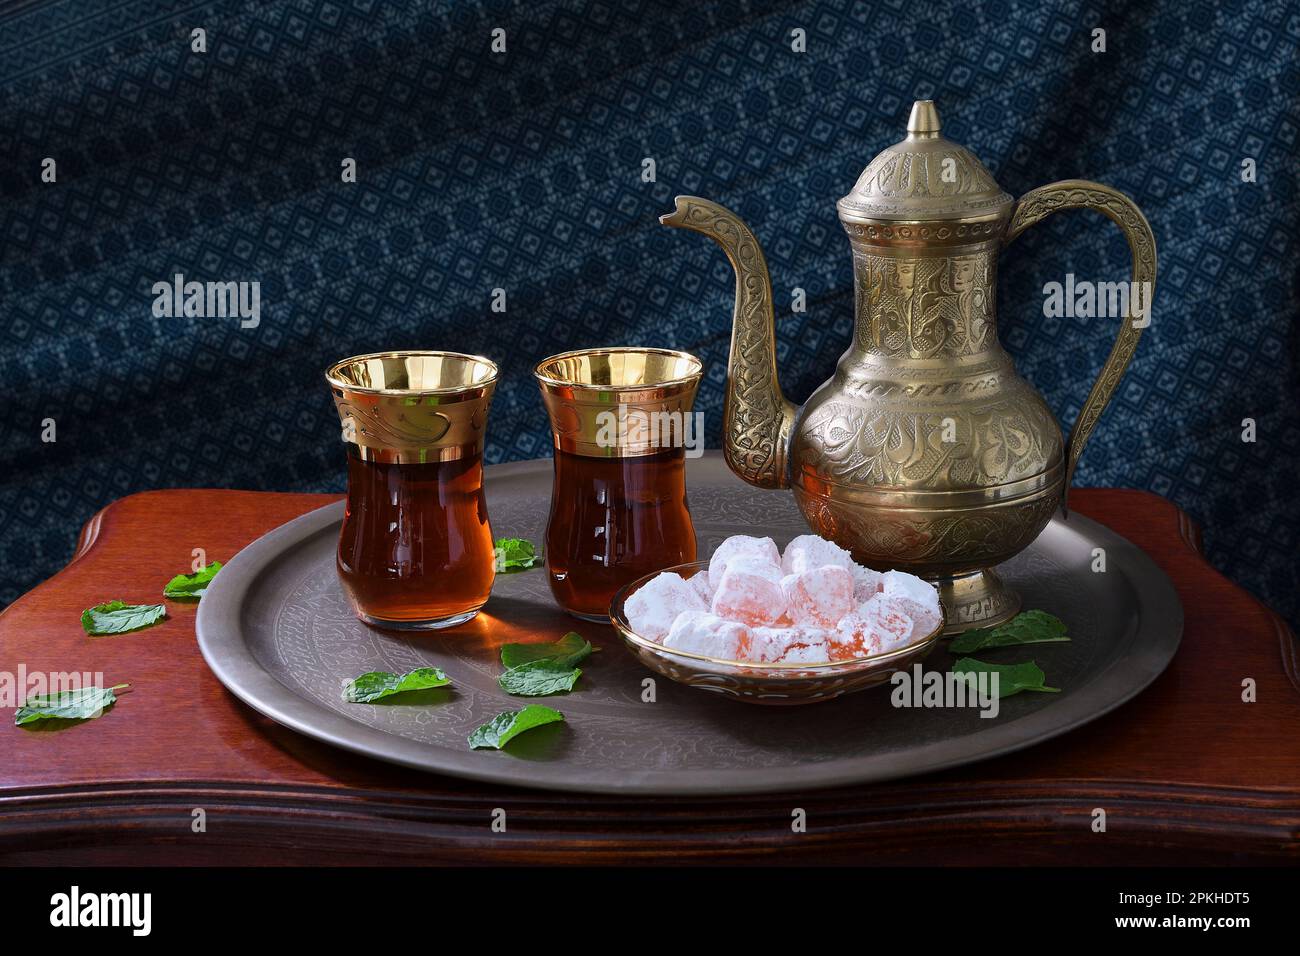 A classic, celebratory, ornate Turkish teapot, two glasses and traditional turkish delights on a tray and wooden table in soft mood lighting Stock Photo